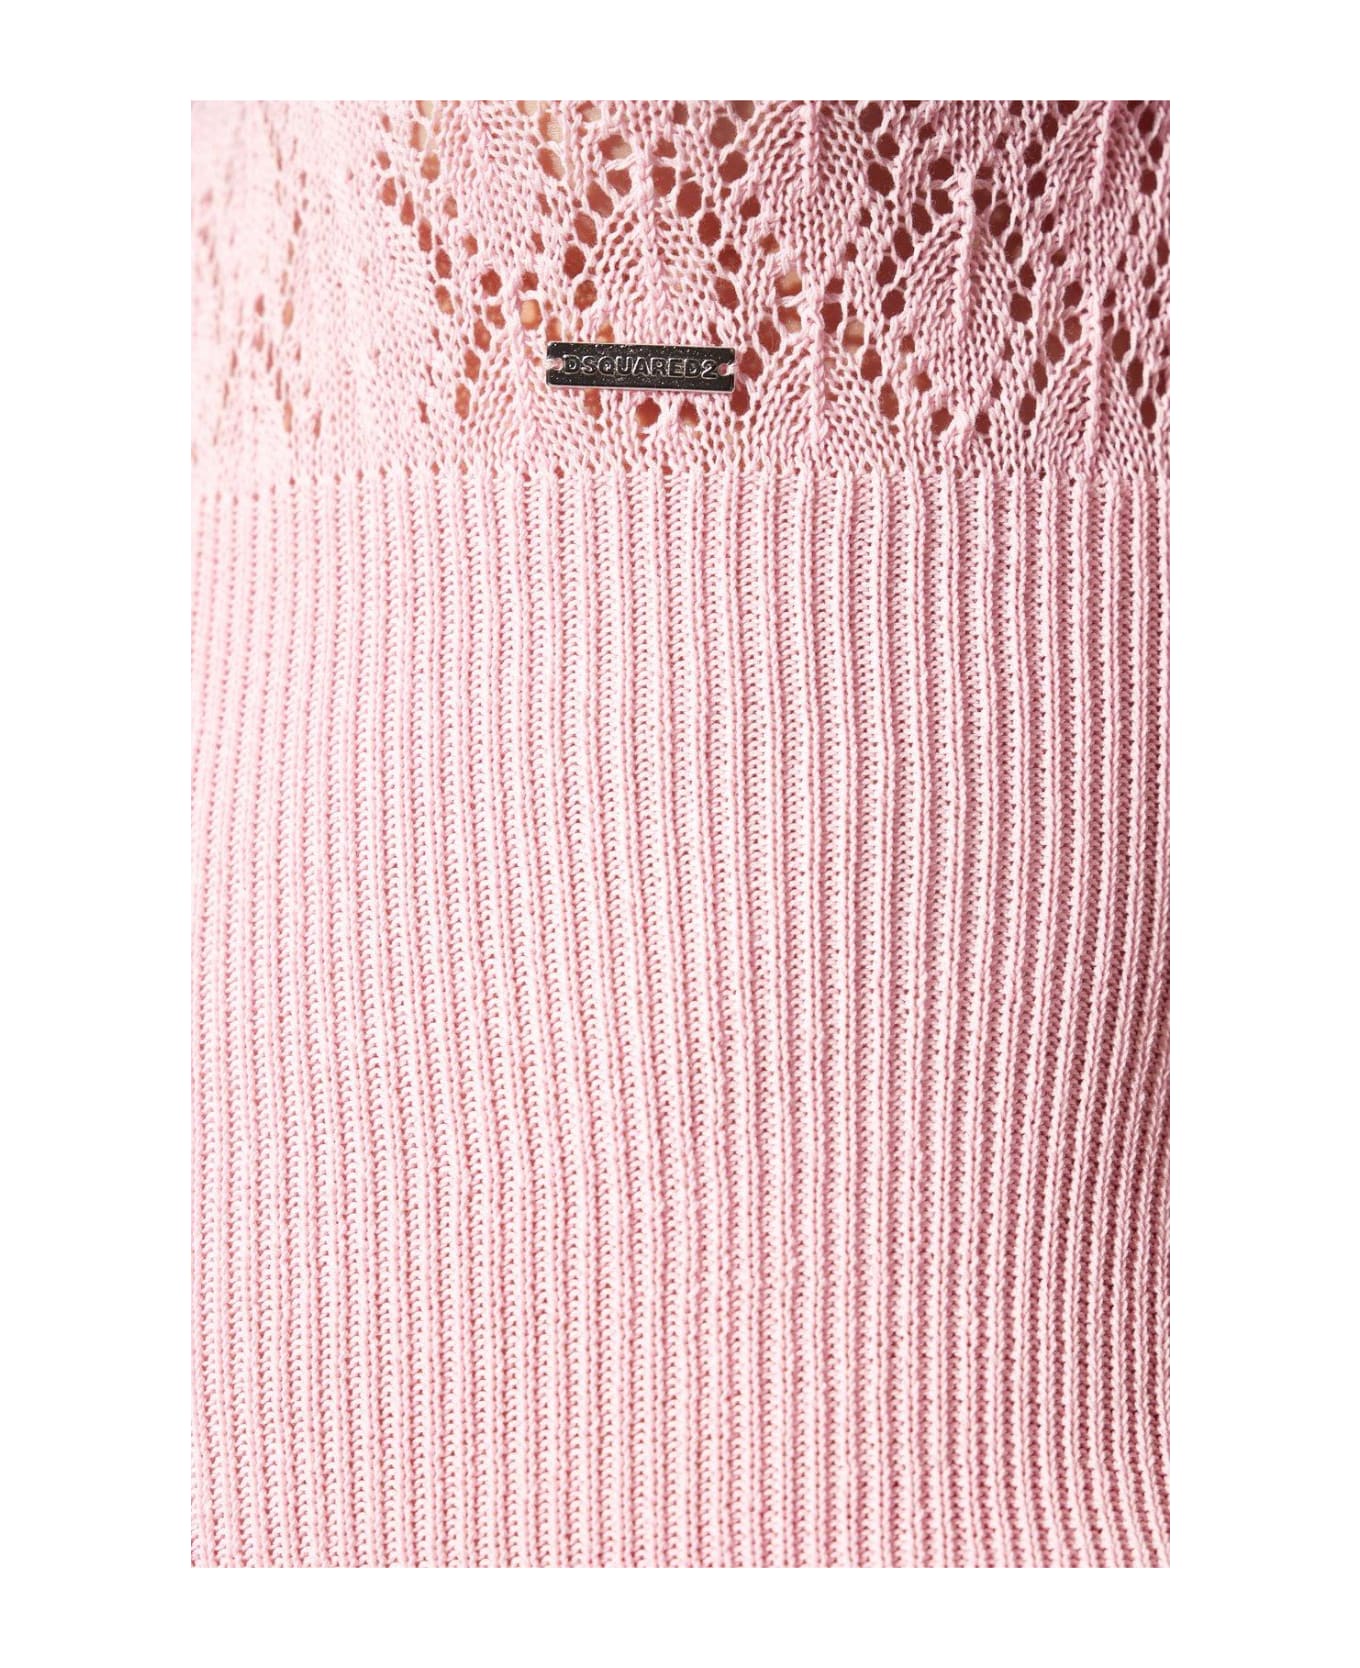 Dsquared2 Bodycon Short Sleeved Knitted Dress - Rosa ポロシャツ